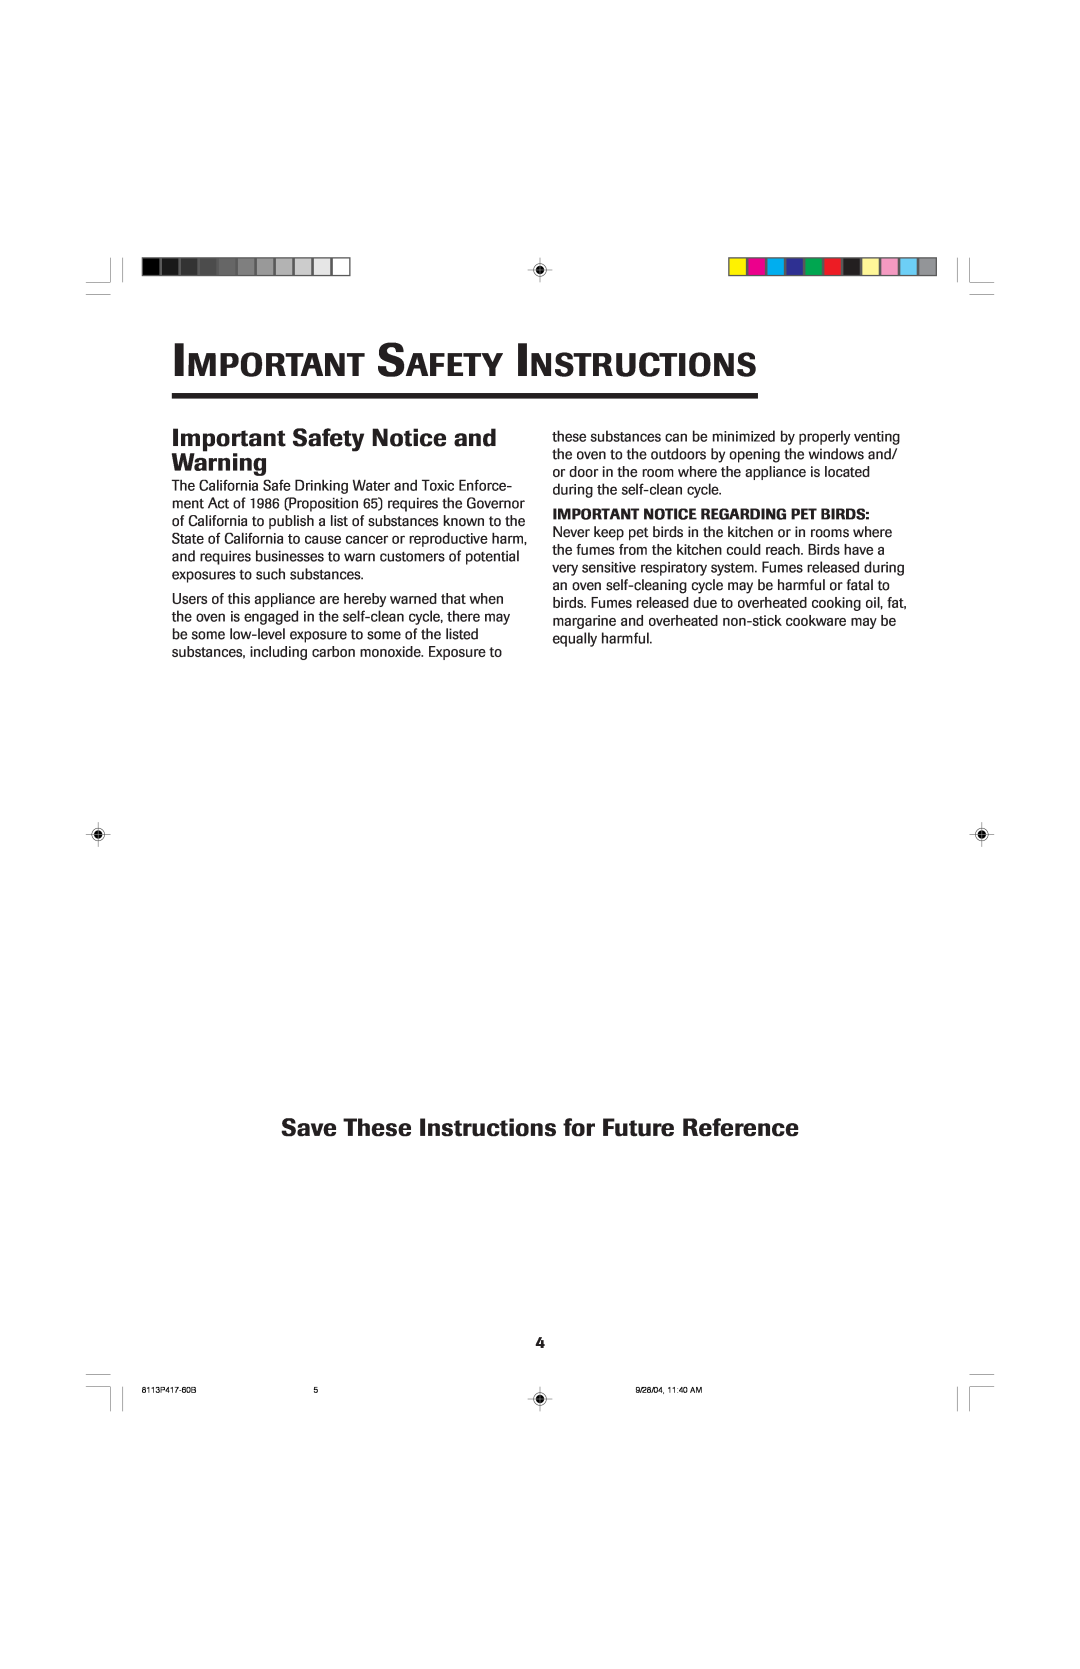 Jenn-Air 800 Important Safety Notice and Warning, Save These Instructions for Future Reference, 8113P417-60B 